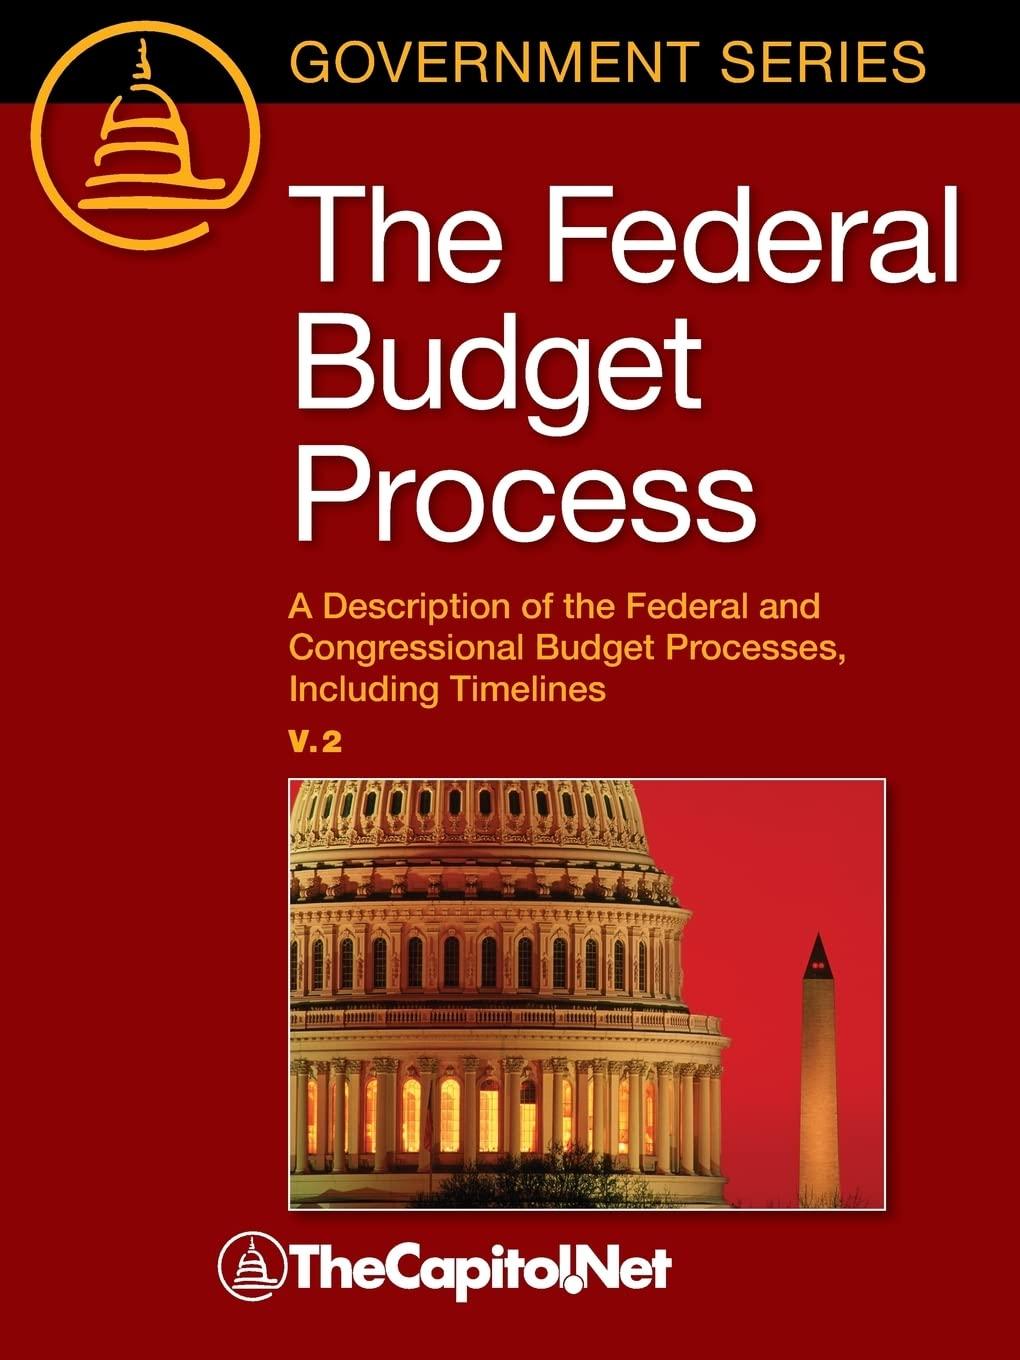 the federal budget process 2nd edition megan lynch, bill heniff, thecapitol.net 1587332930, 978-1587332937